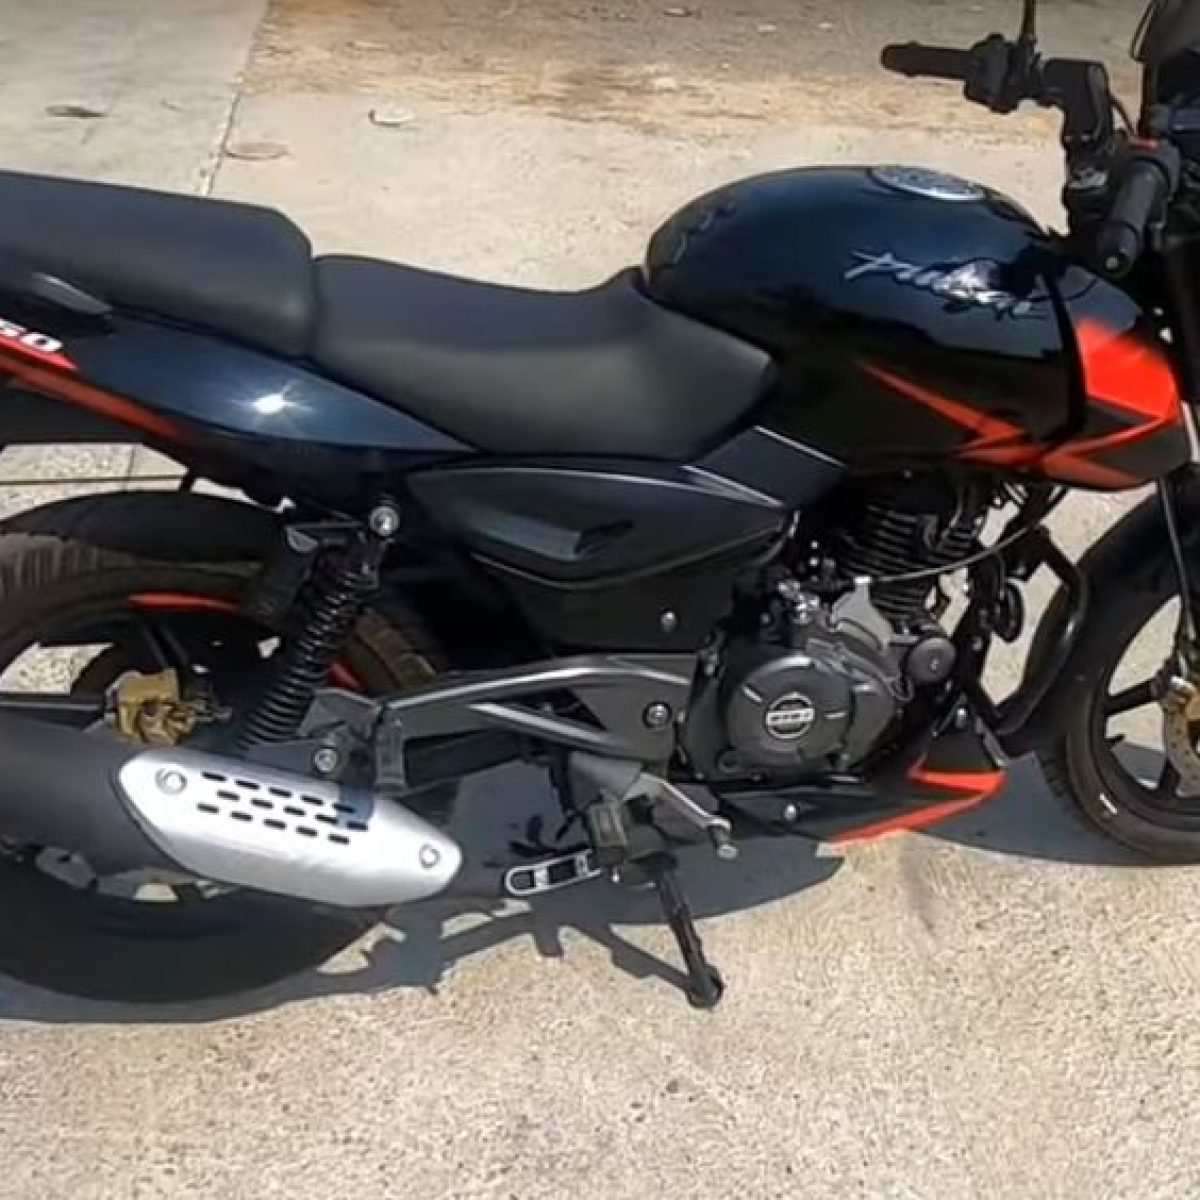 New Pulsar 150 Price 2020 2020 Pulsar 150 Spied While Testing